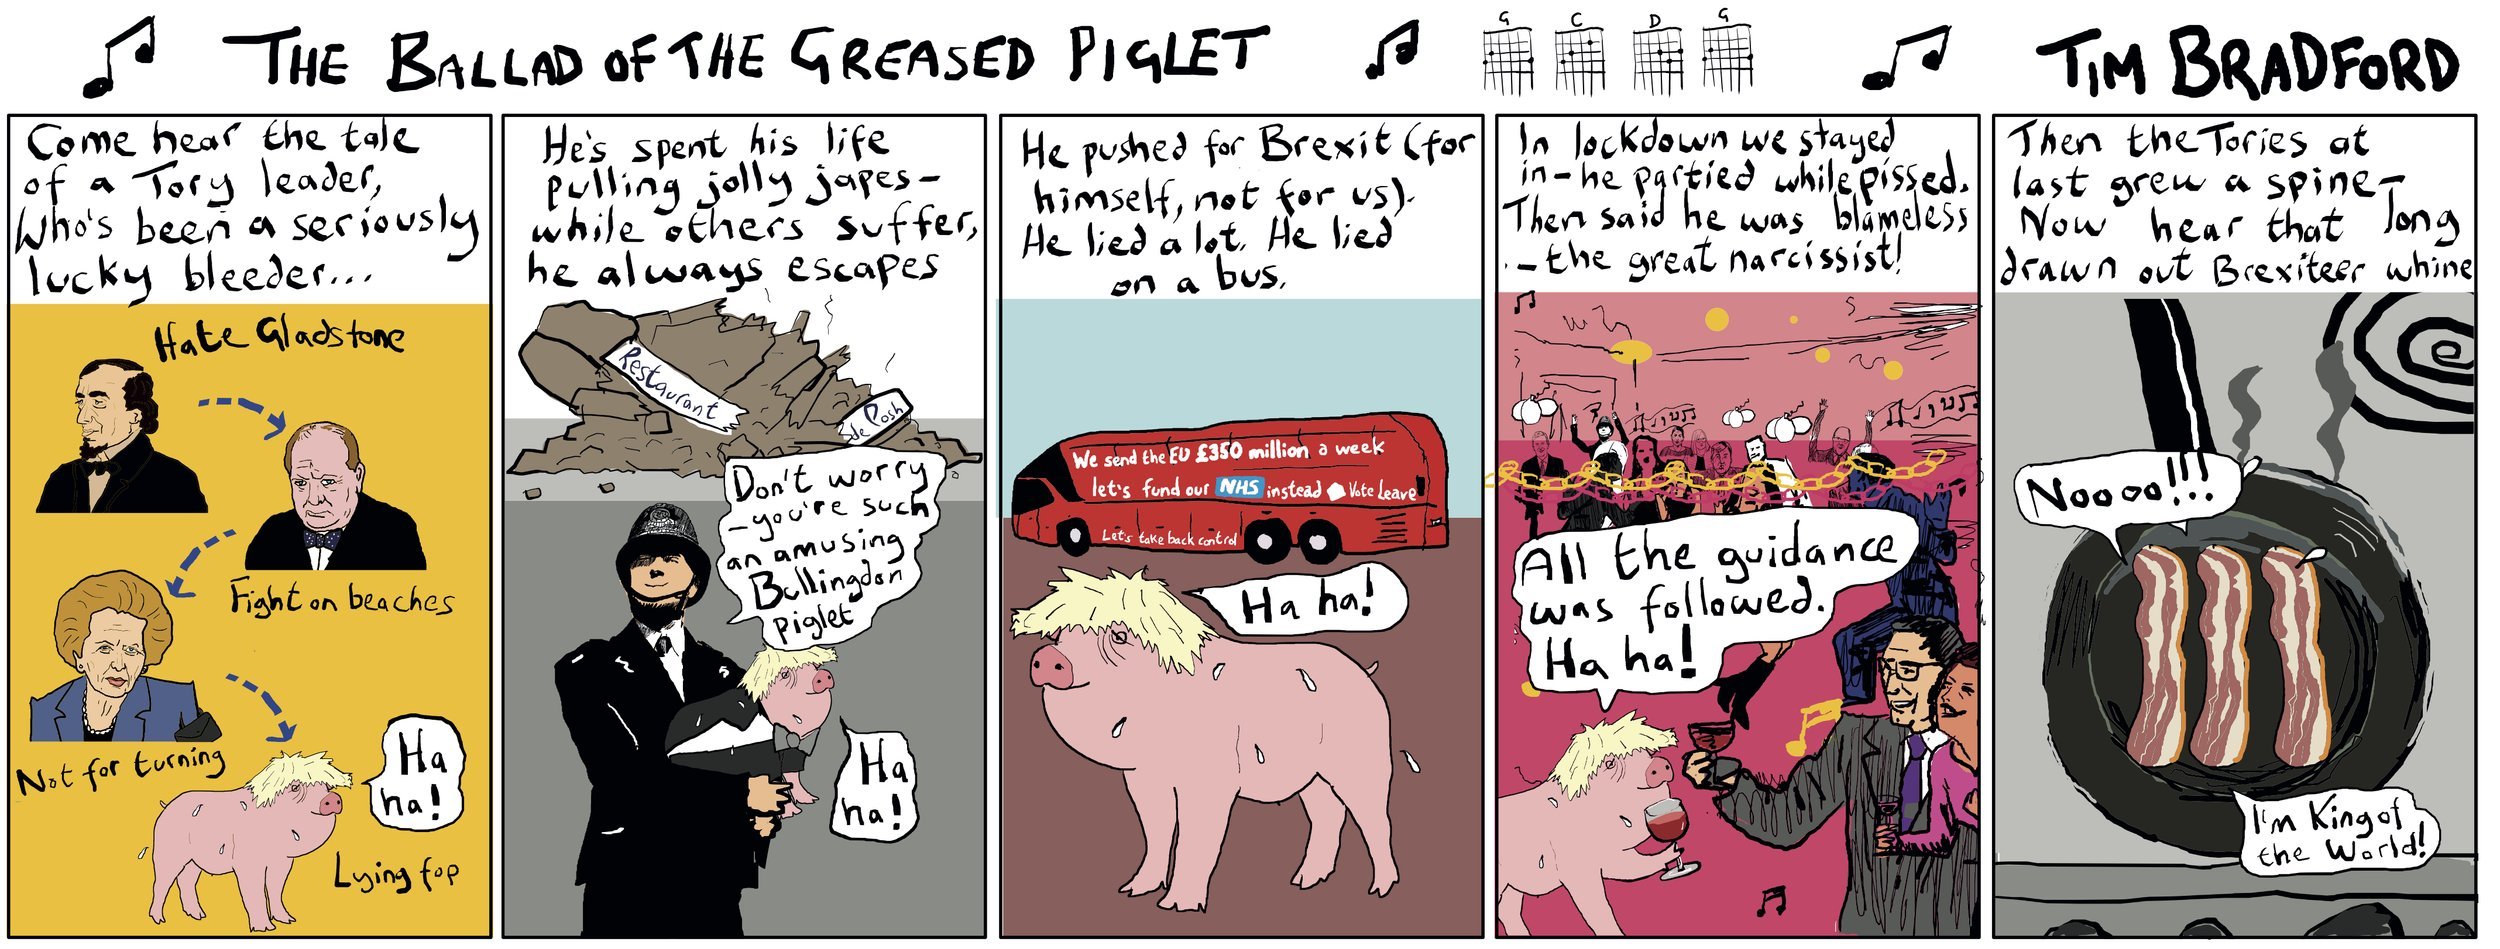 he Ballad of the Greased Piglet - 06/06/2022